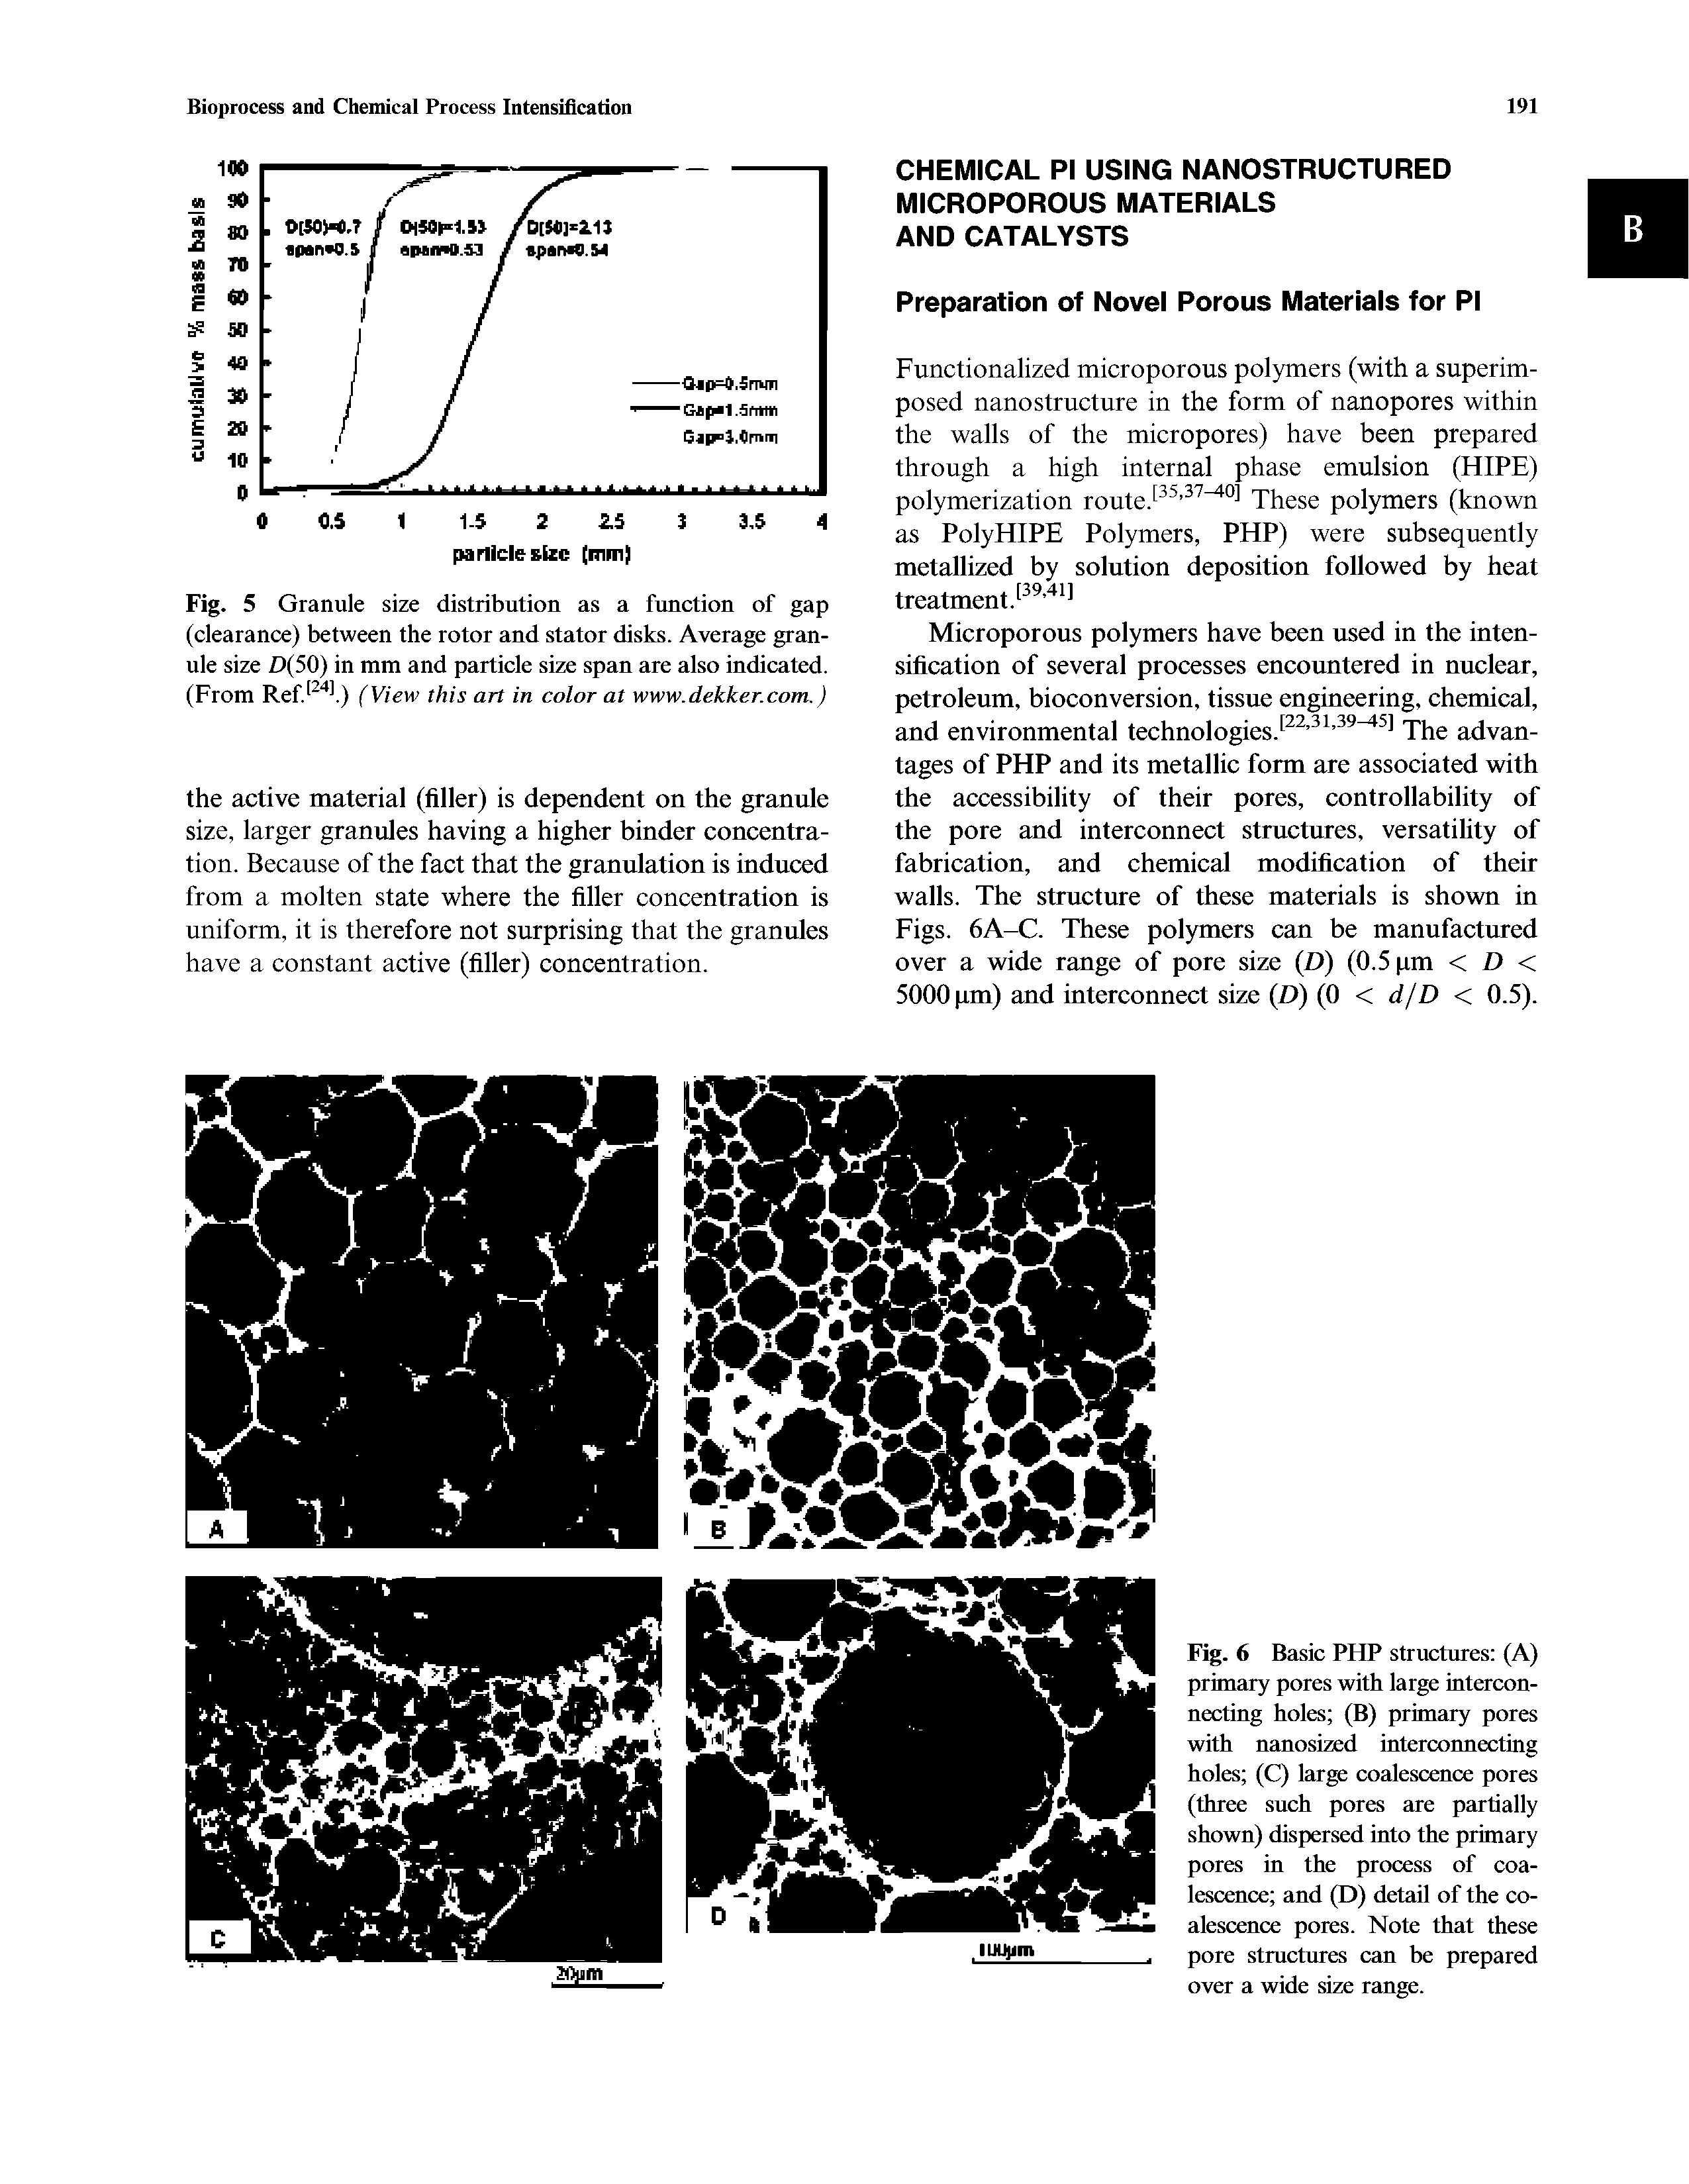 Fig. 5 Granule size distribution as a function of gap (clearance) between the rotor and stator disks. Average granule size )(50) in mm and particle size span are also indicated. (From Ref (View this art in color at www.dekker.com.)...